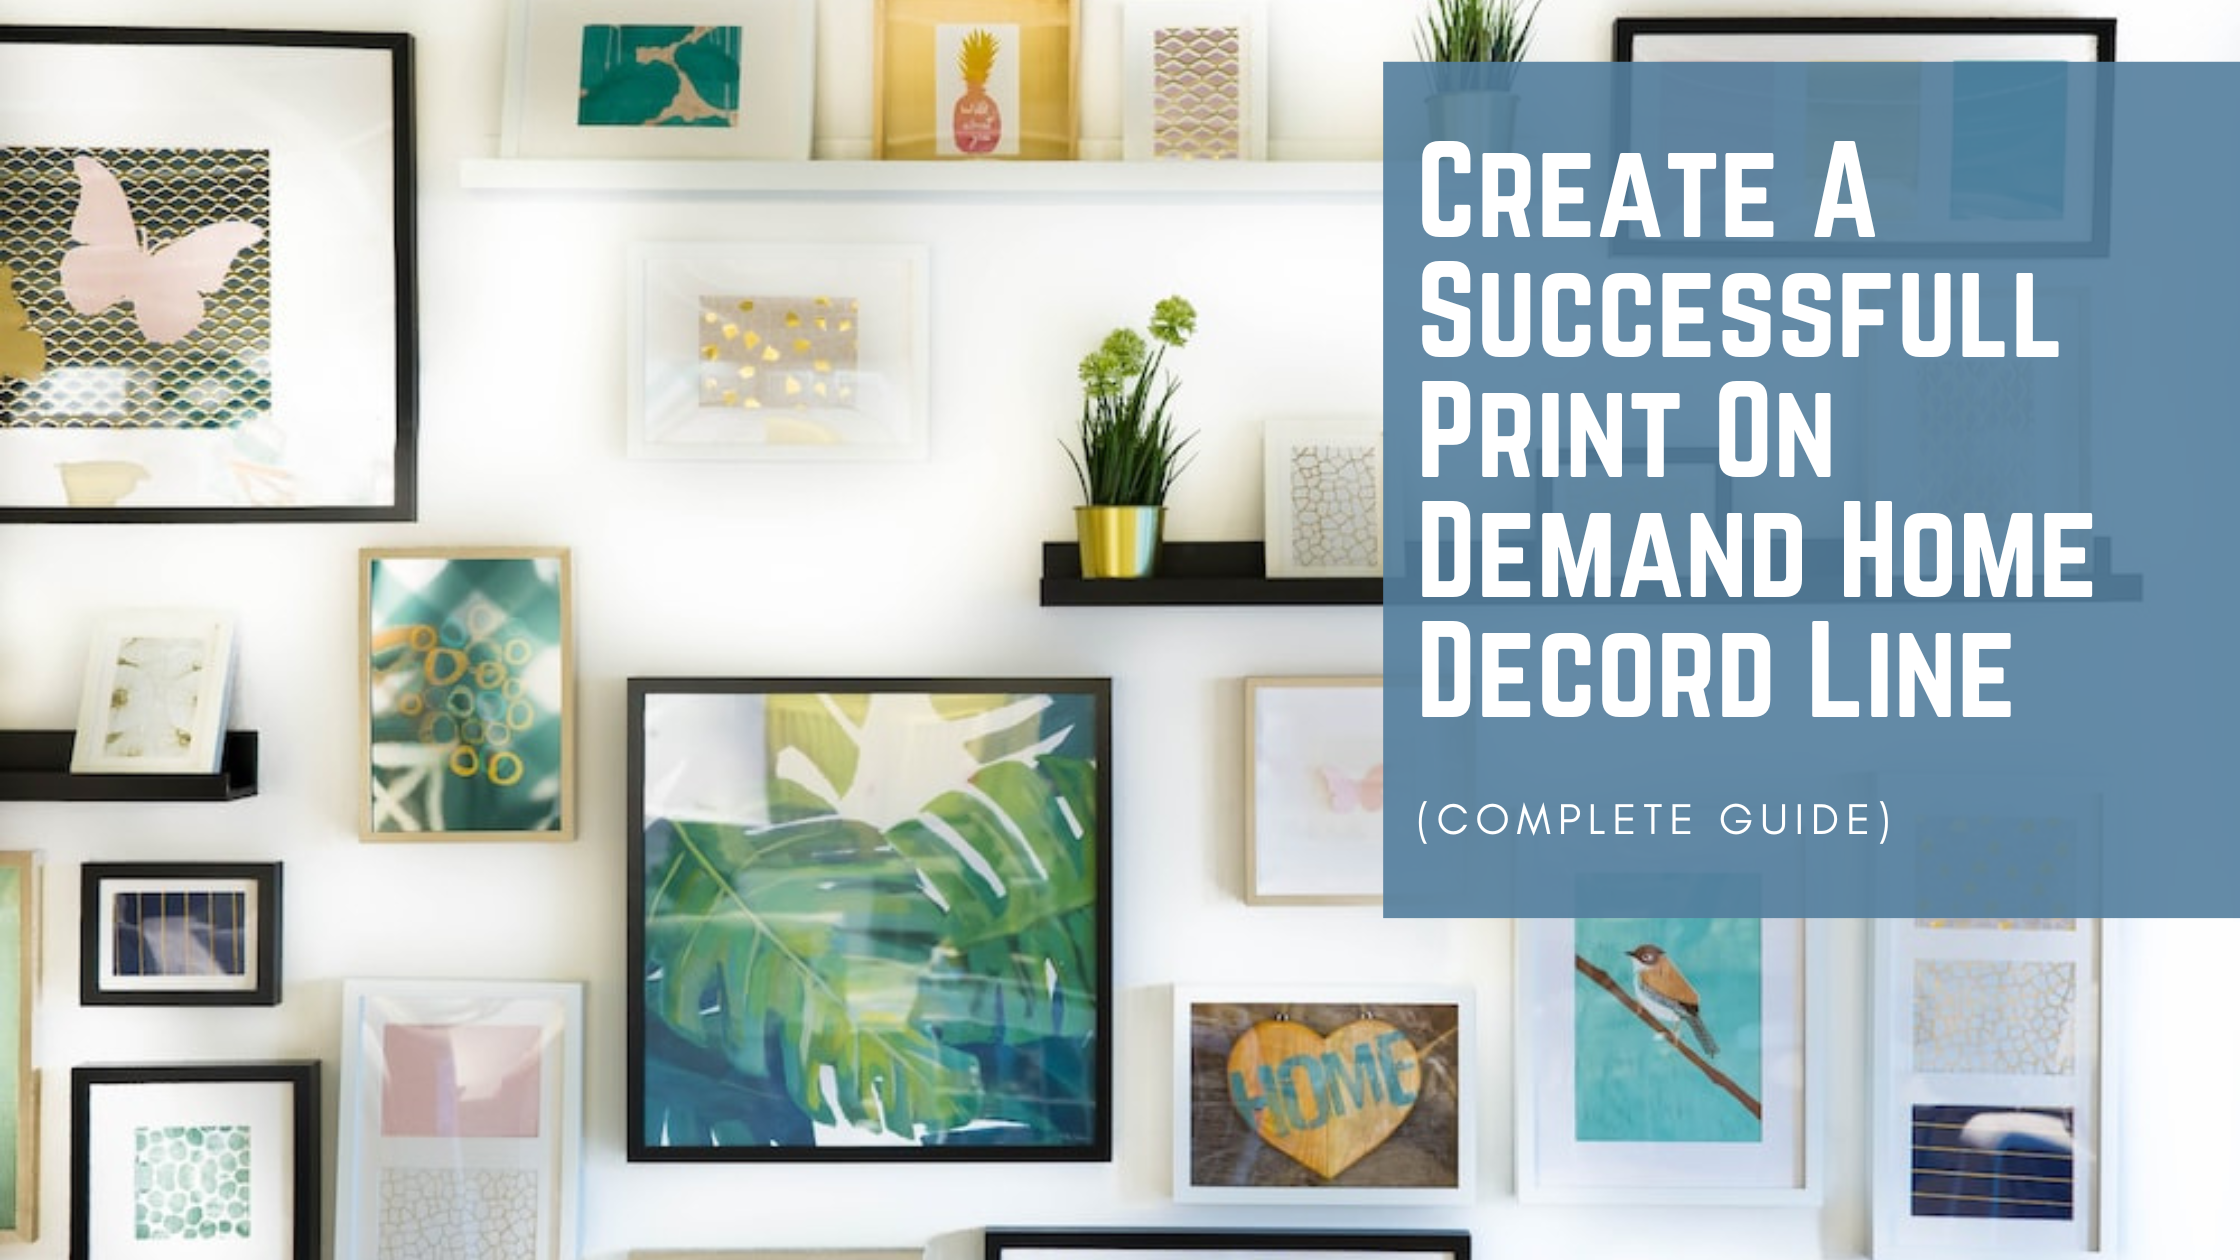 How to Create a Successful Print on Demand Home Decor